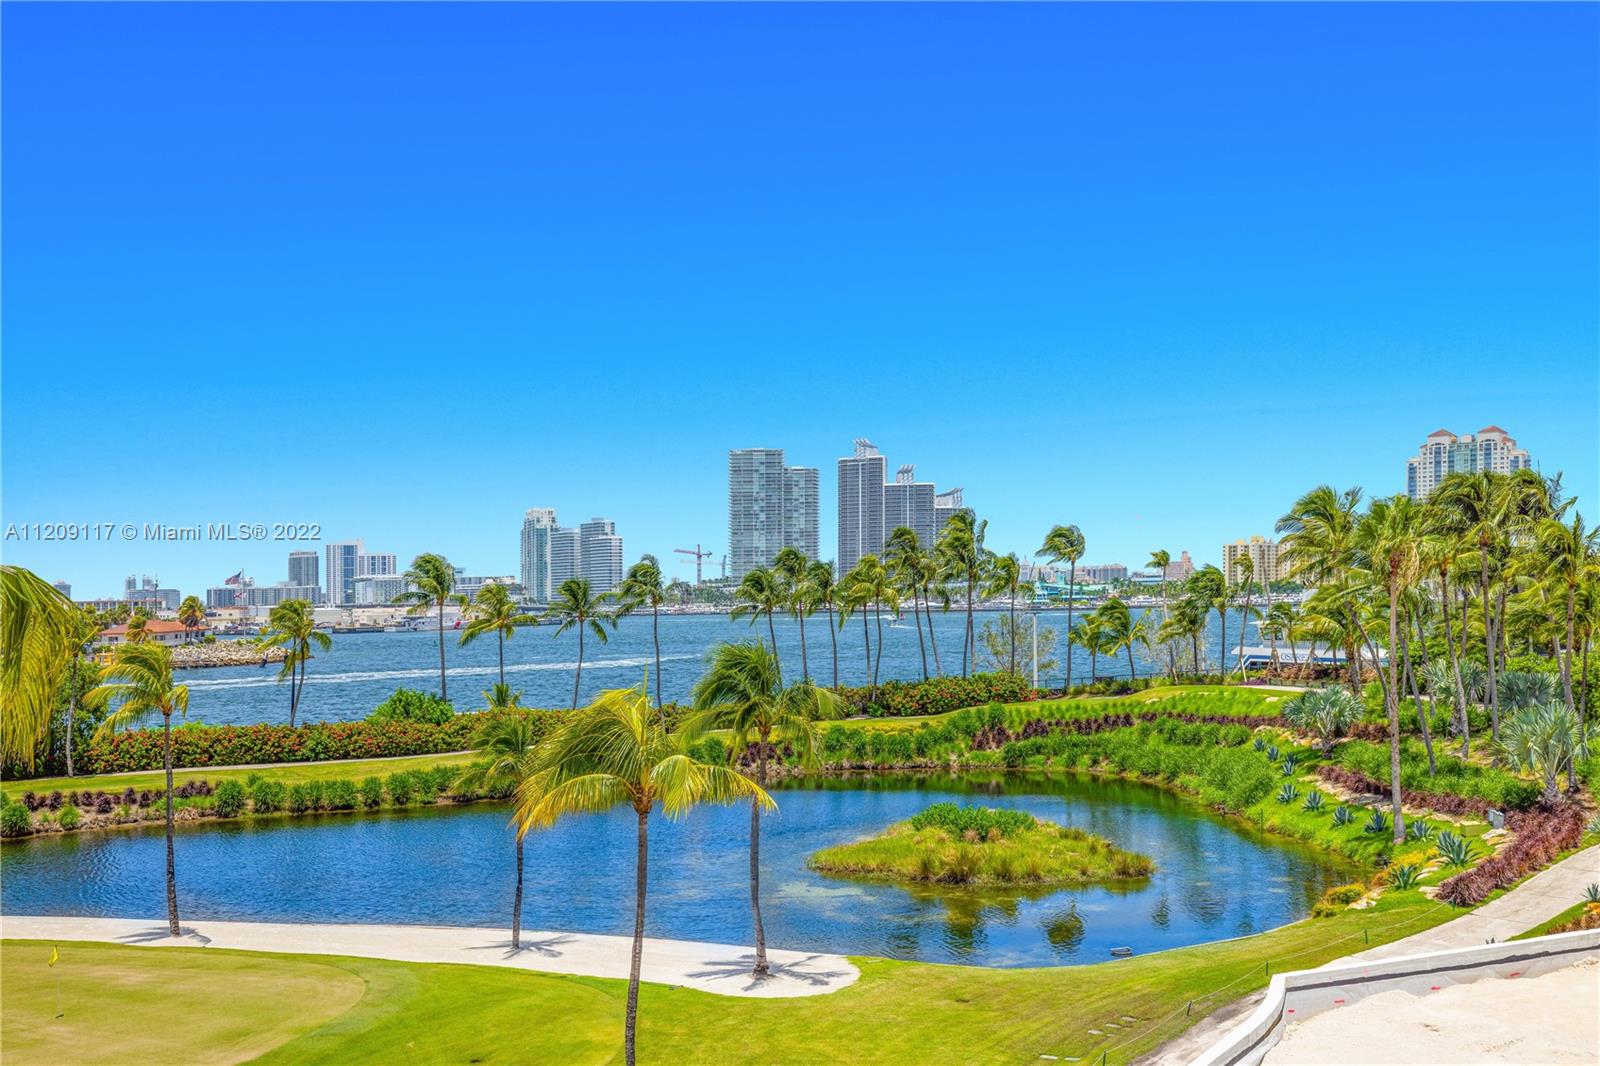 68  Fisher Island Drive  For Sale A11209117, FL